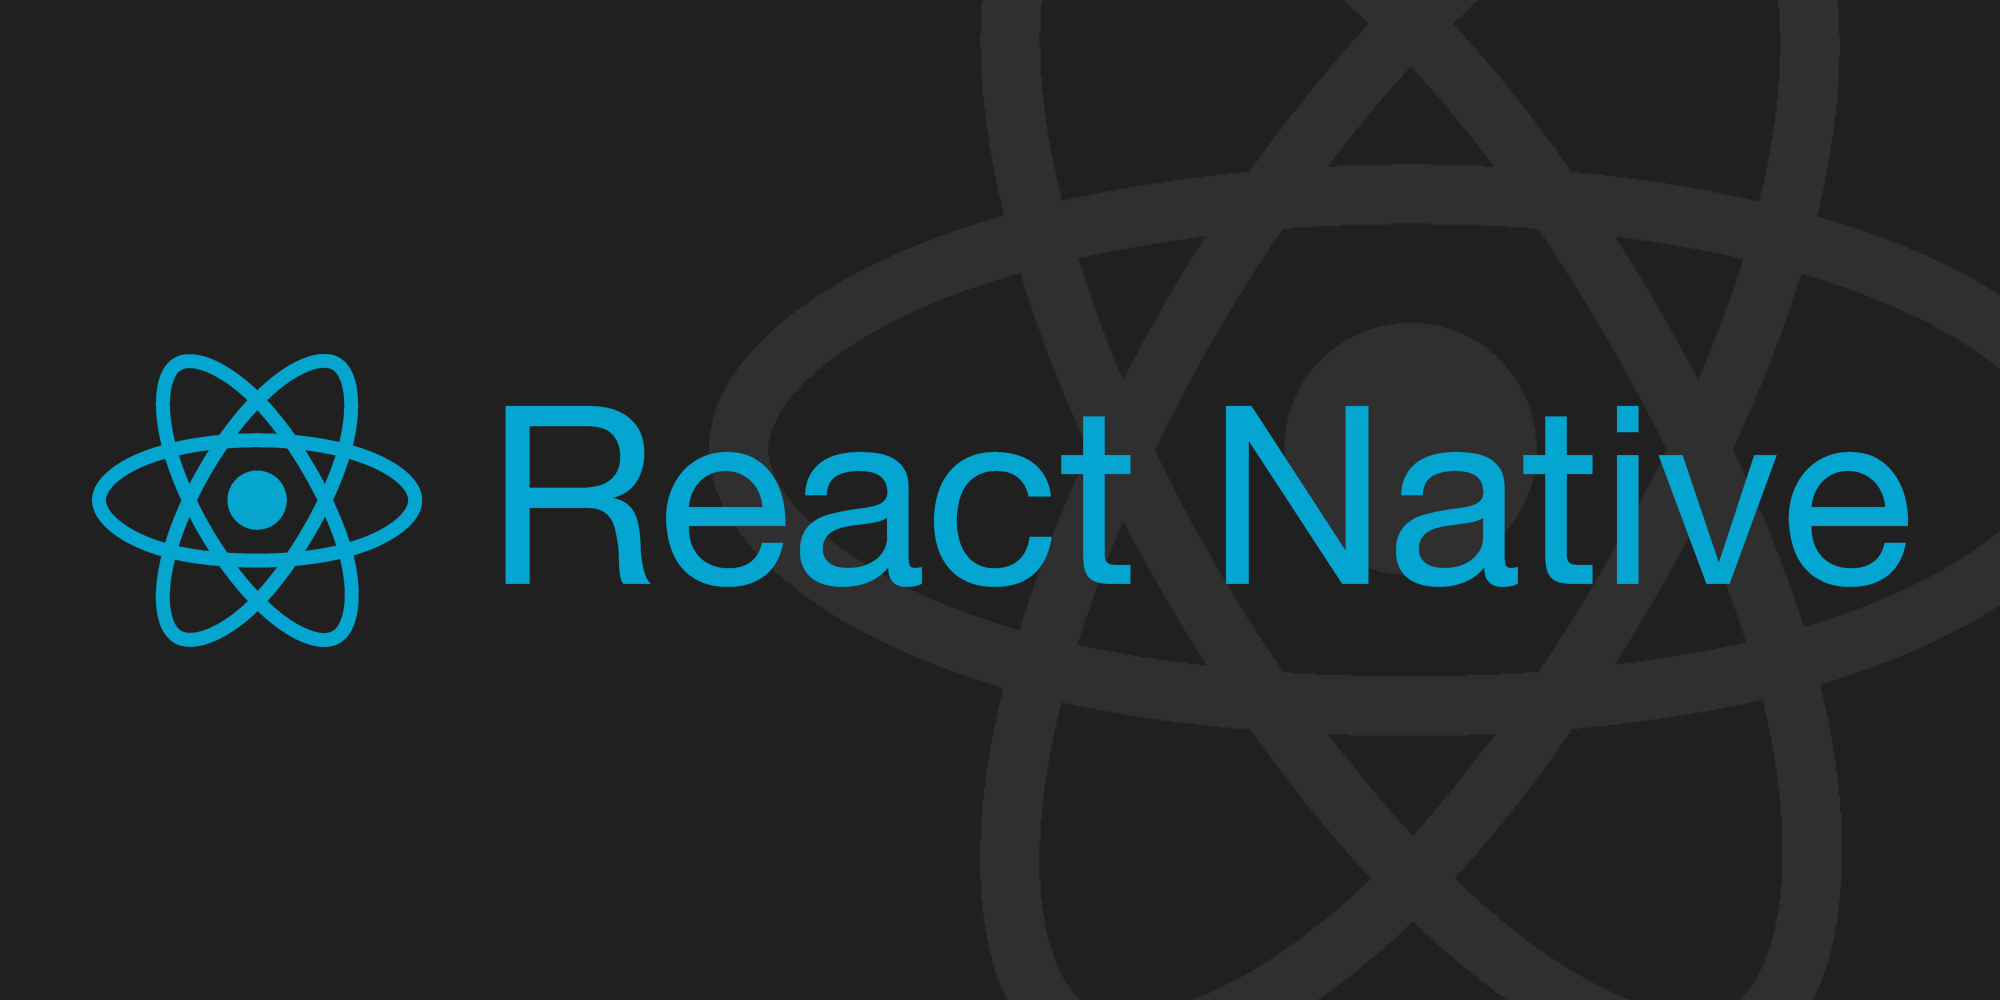 React Native: How to build mobile apps faster? - AppStud